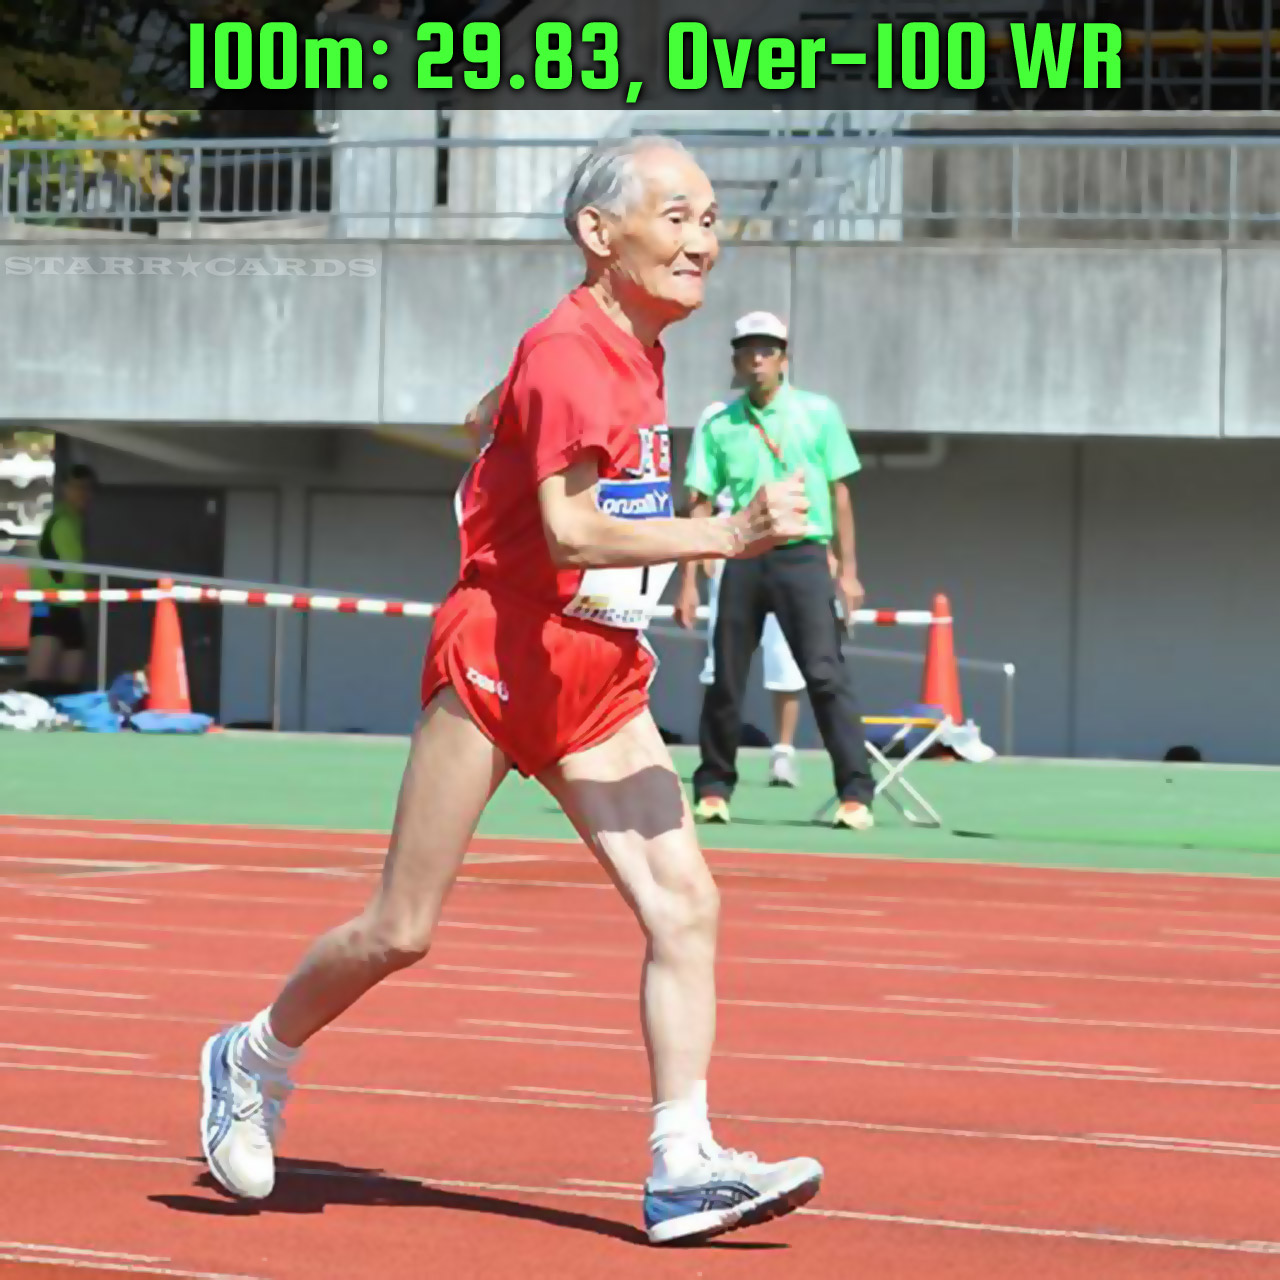 Japan's Hidekichi Miyazaki holds the 100m world record for centenarians with a time of 29.83 seconds.